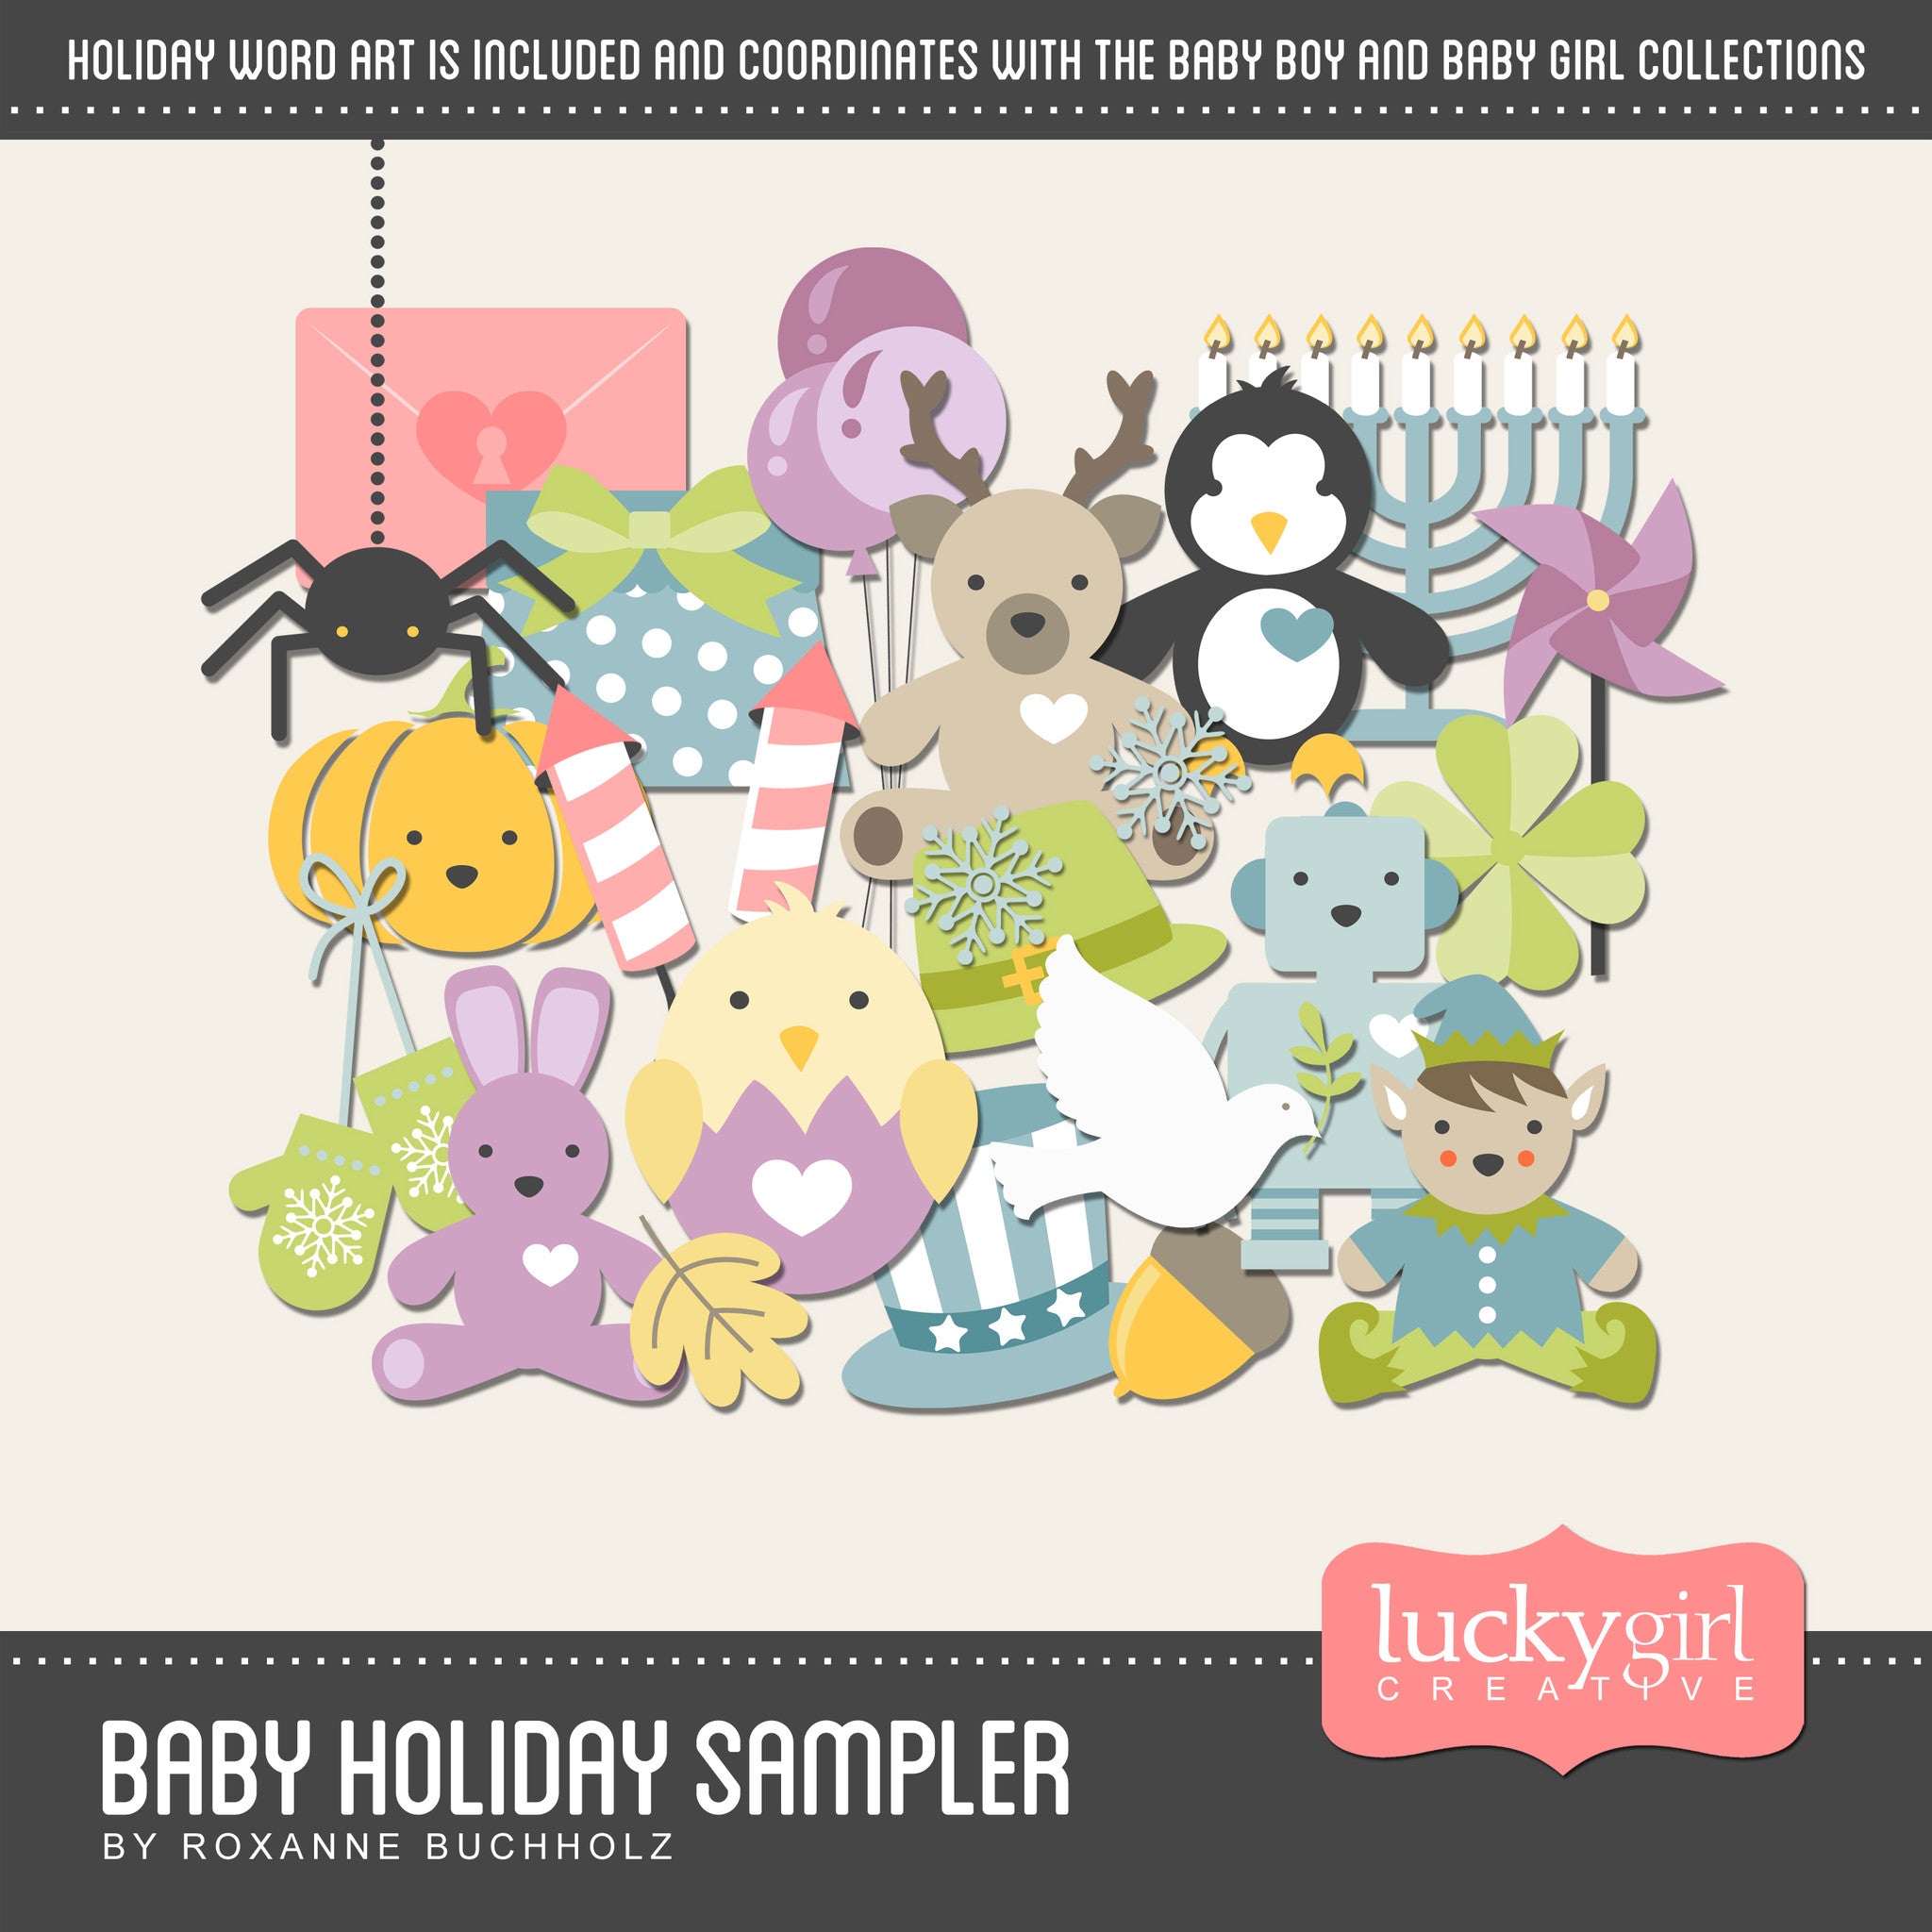 Looking for art for a baby book or baby’s first year calendar? Look no further than the Baby Holiday Sampler Digital Scrapbook Kit. Full of bold, contemporary, toddler-style holiday icons, this digital art collection is perfect for baby or pre-school projects that span the seasons.